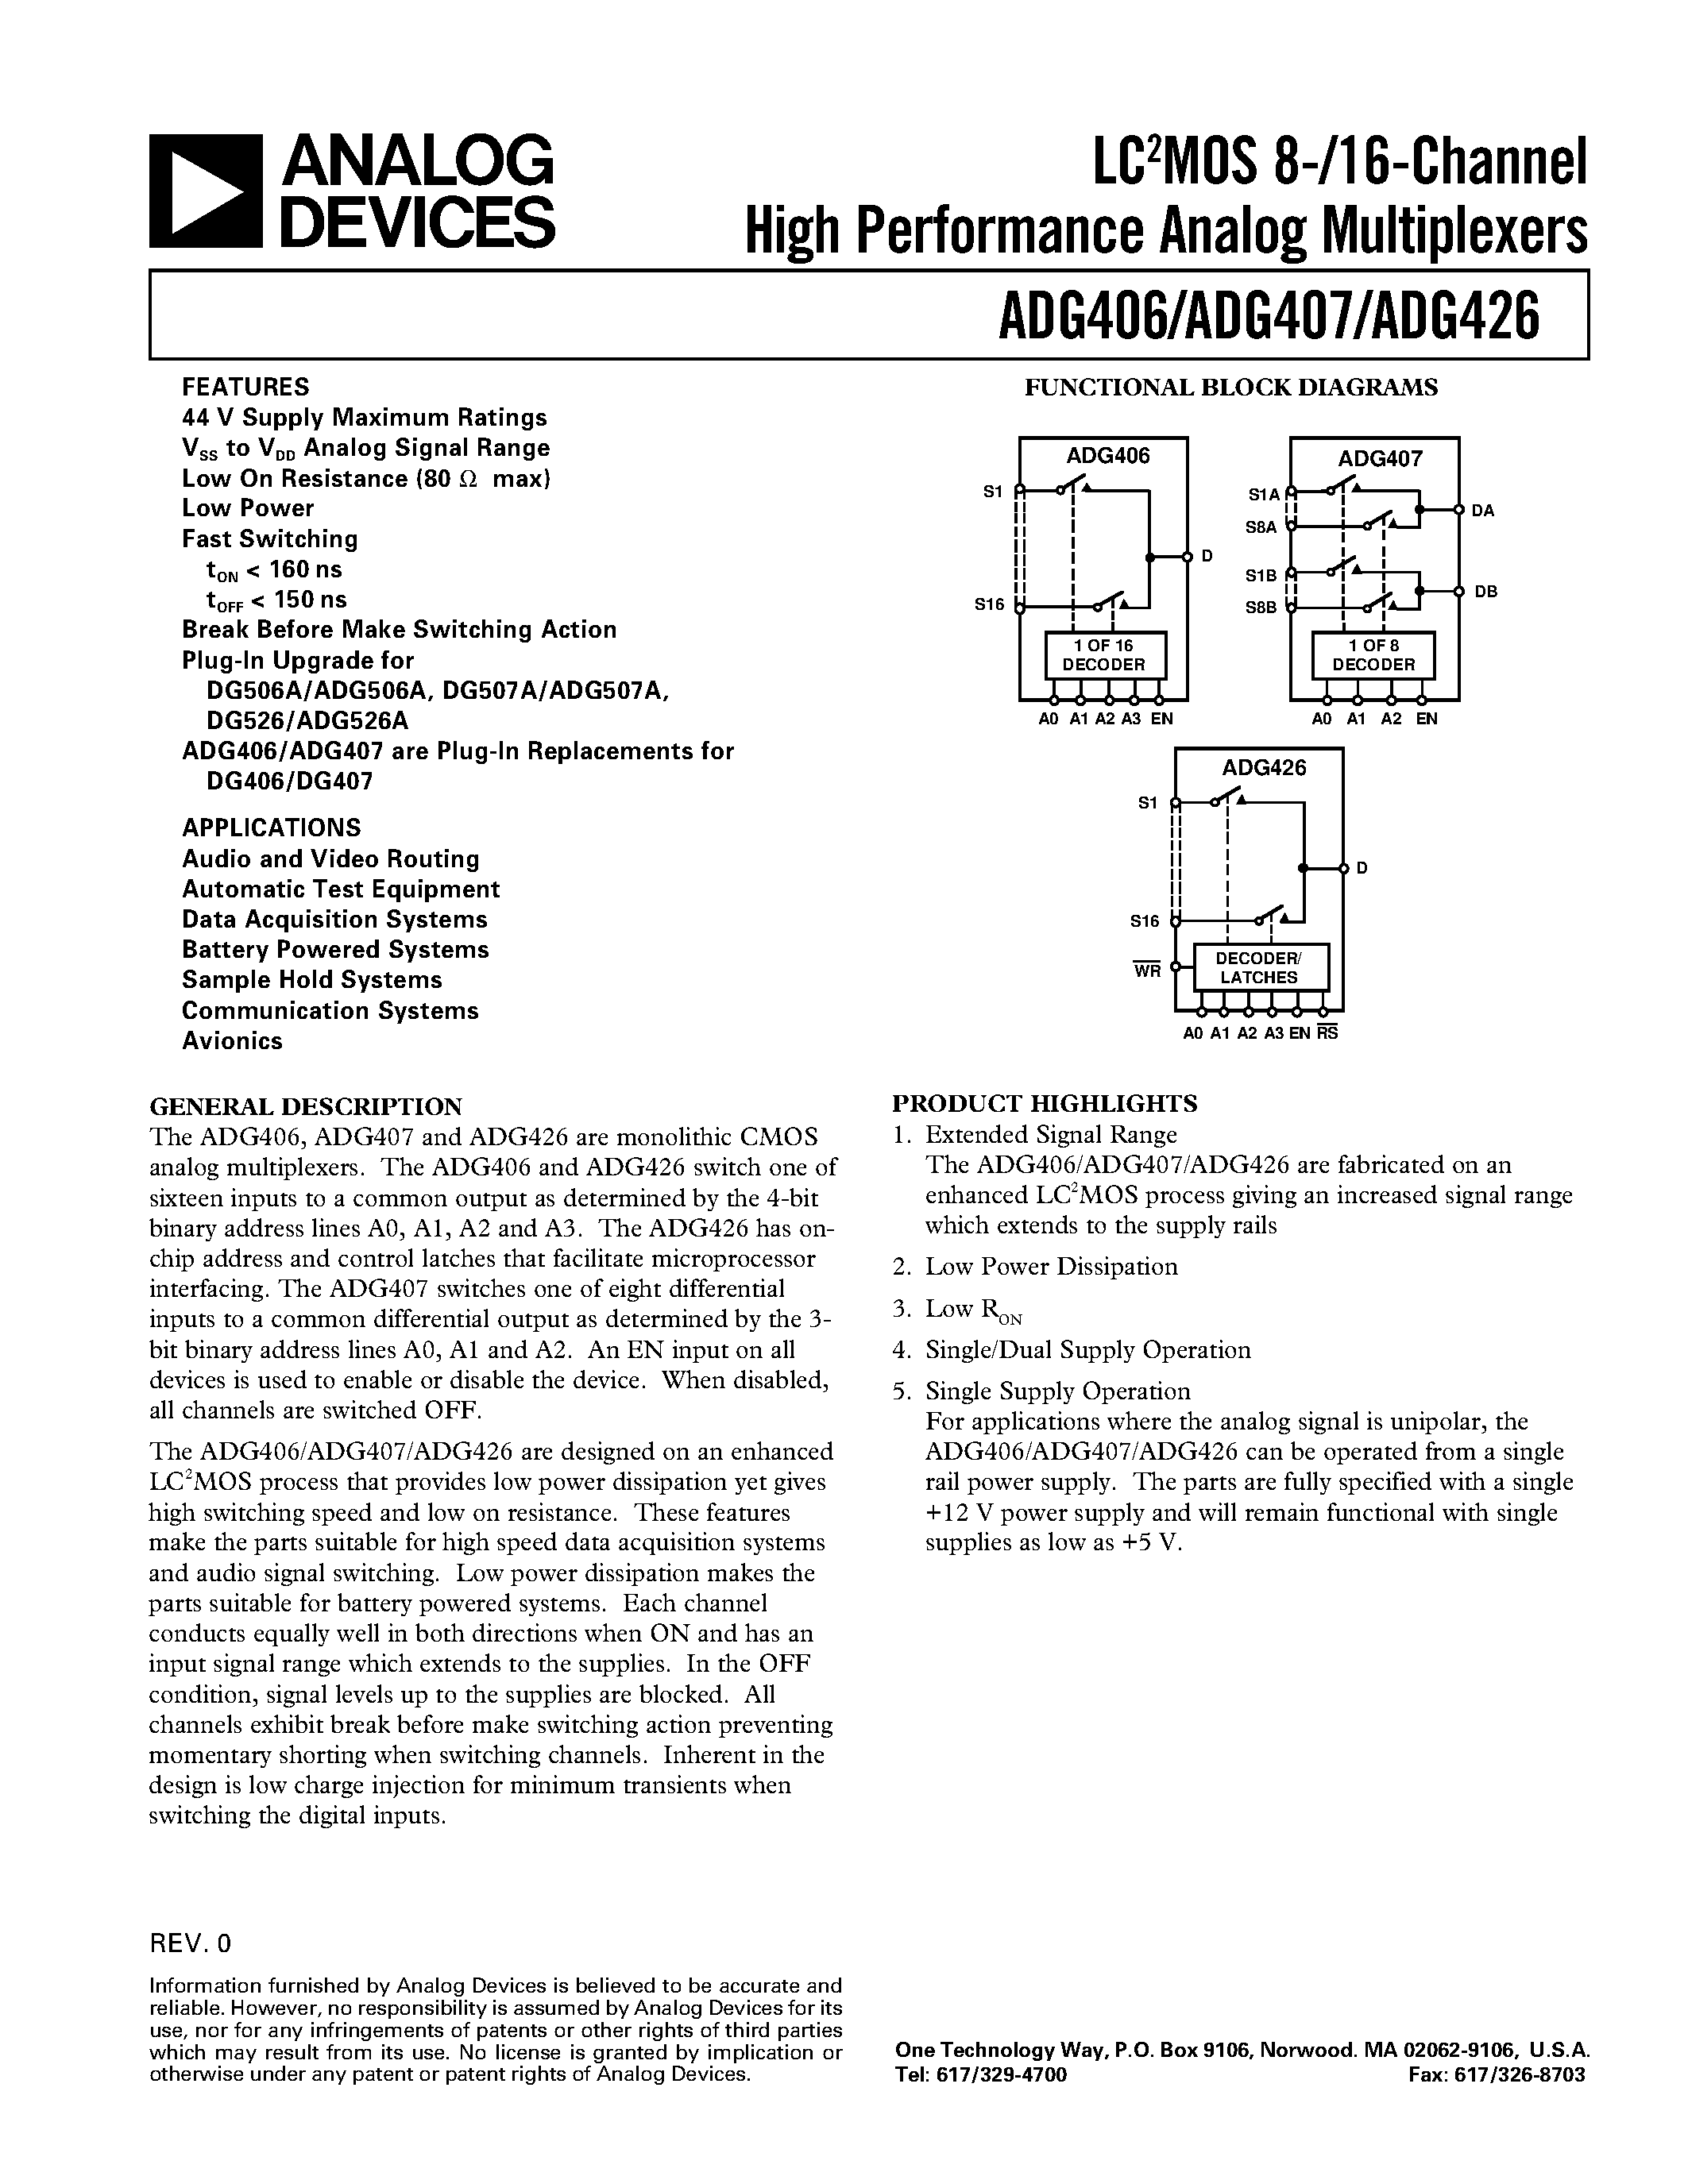 Datasheet ADG407 - LC2MOS 8-/16-Channel High Performance Analog Multiplexers page 1